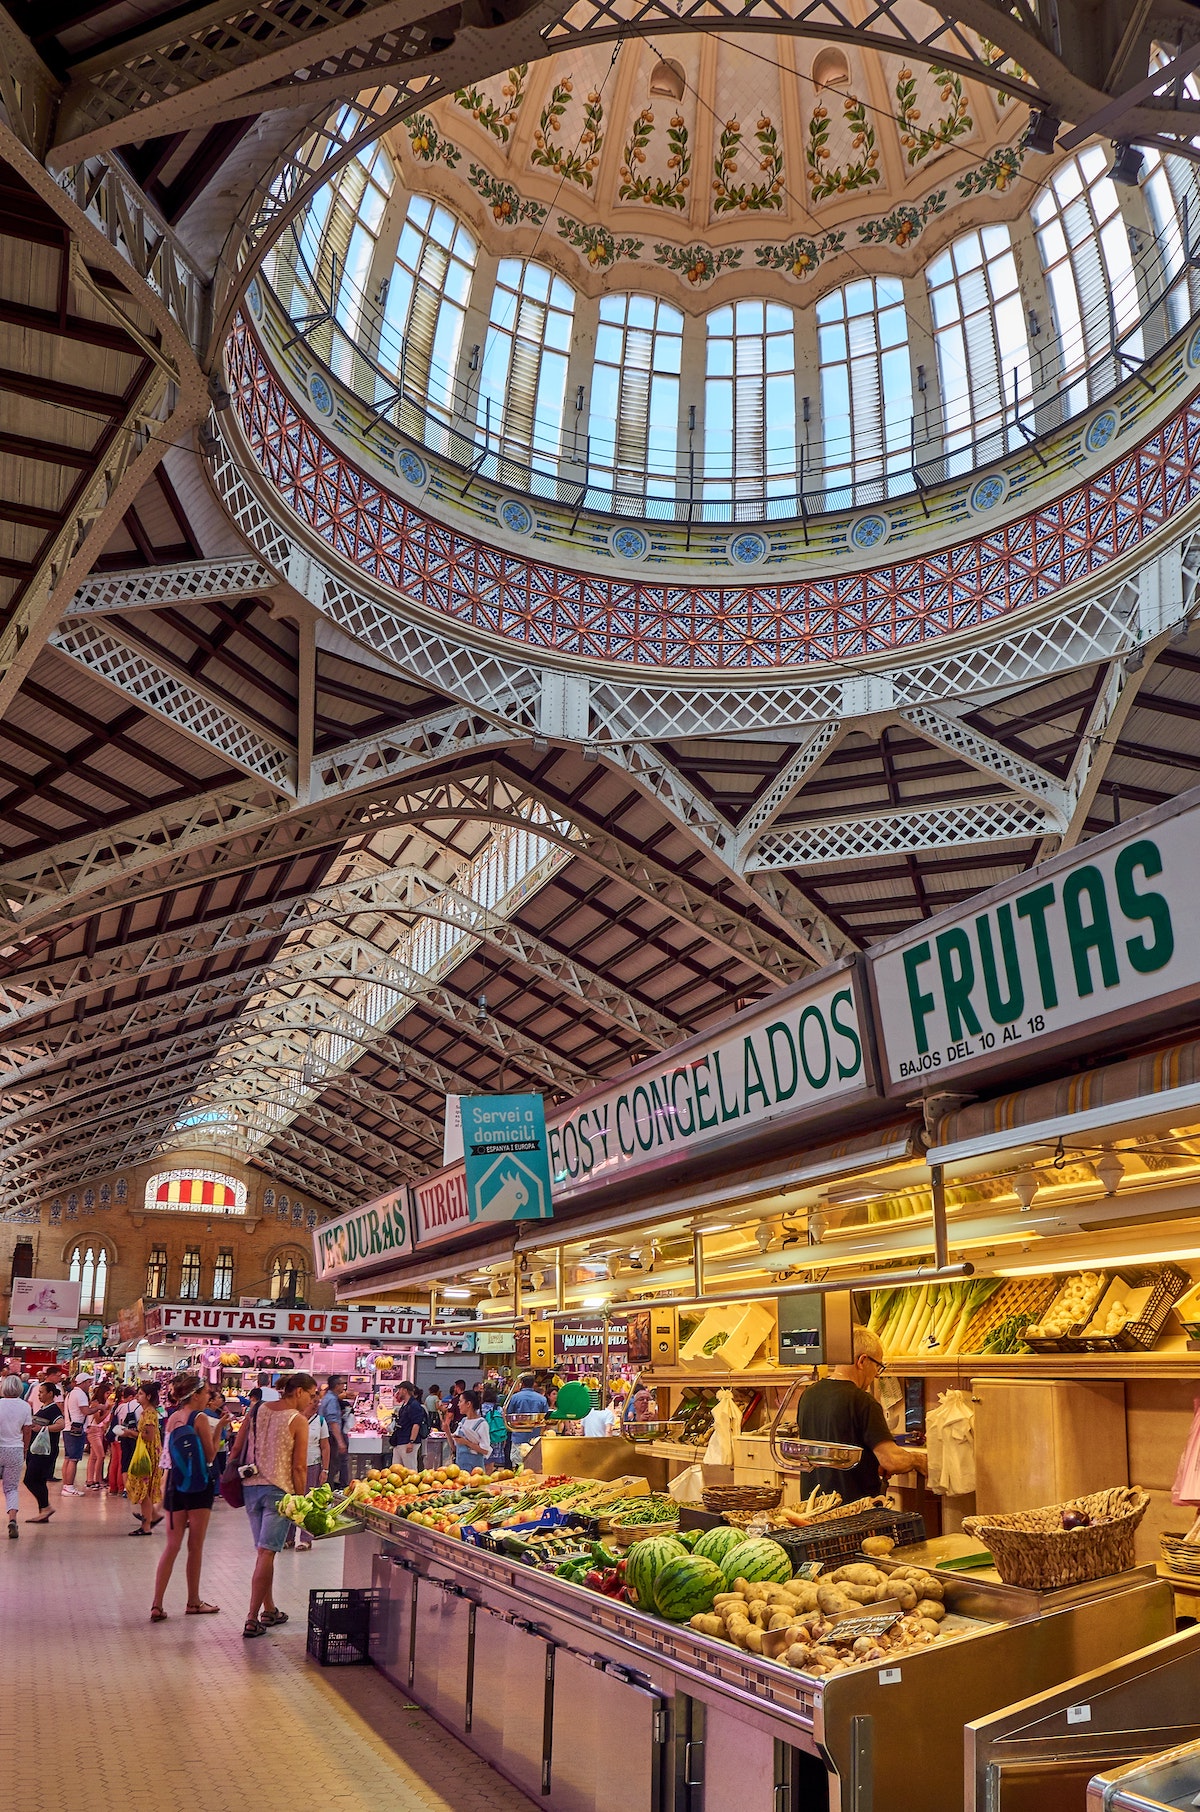 Interior of a large market hall with a glass dome above the stalls.